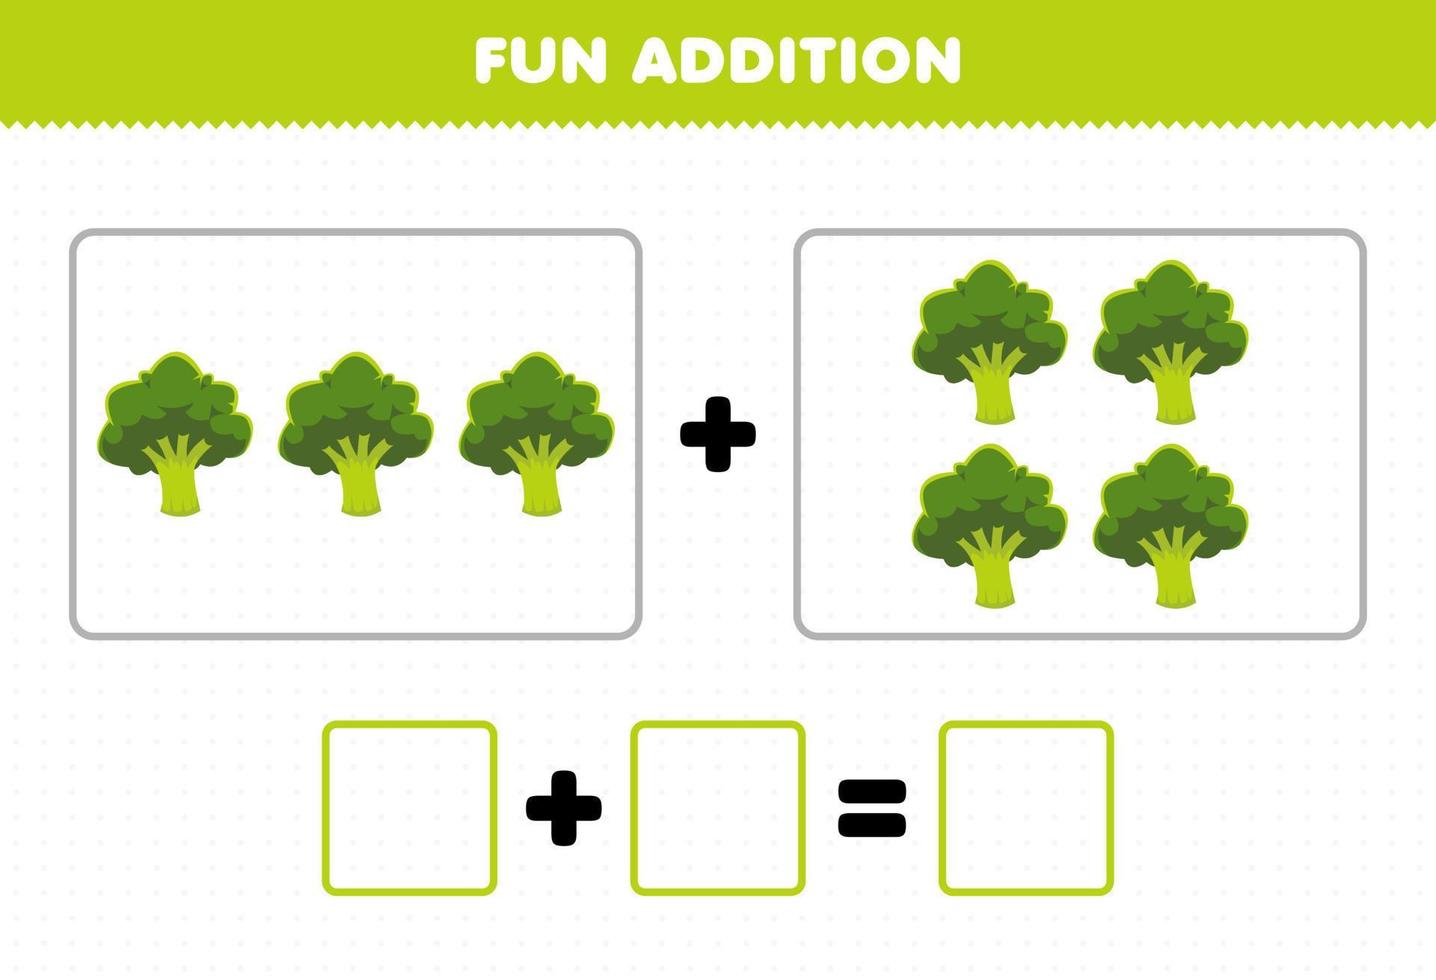 Education game for children fun addition by counting cartoon vegetable broccoli pictures worksheet vector